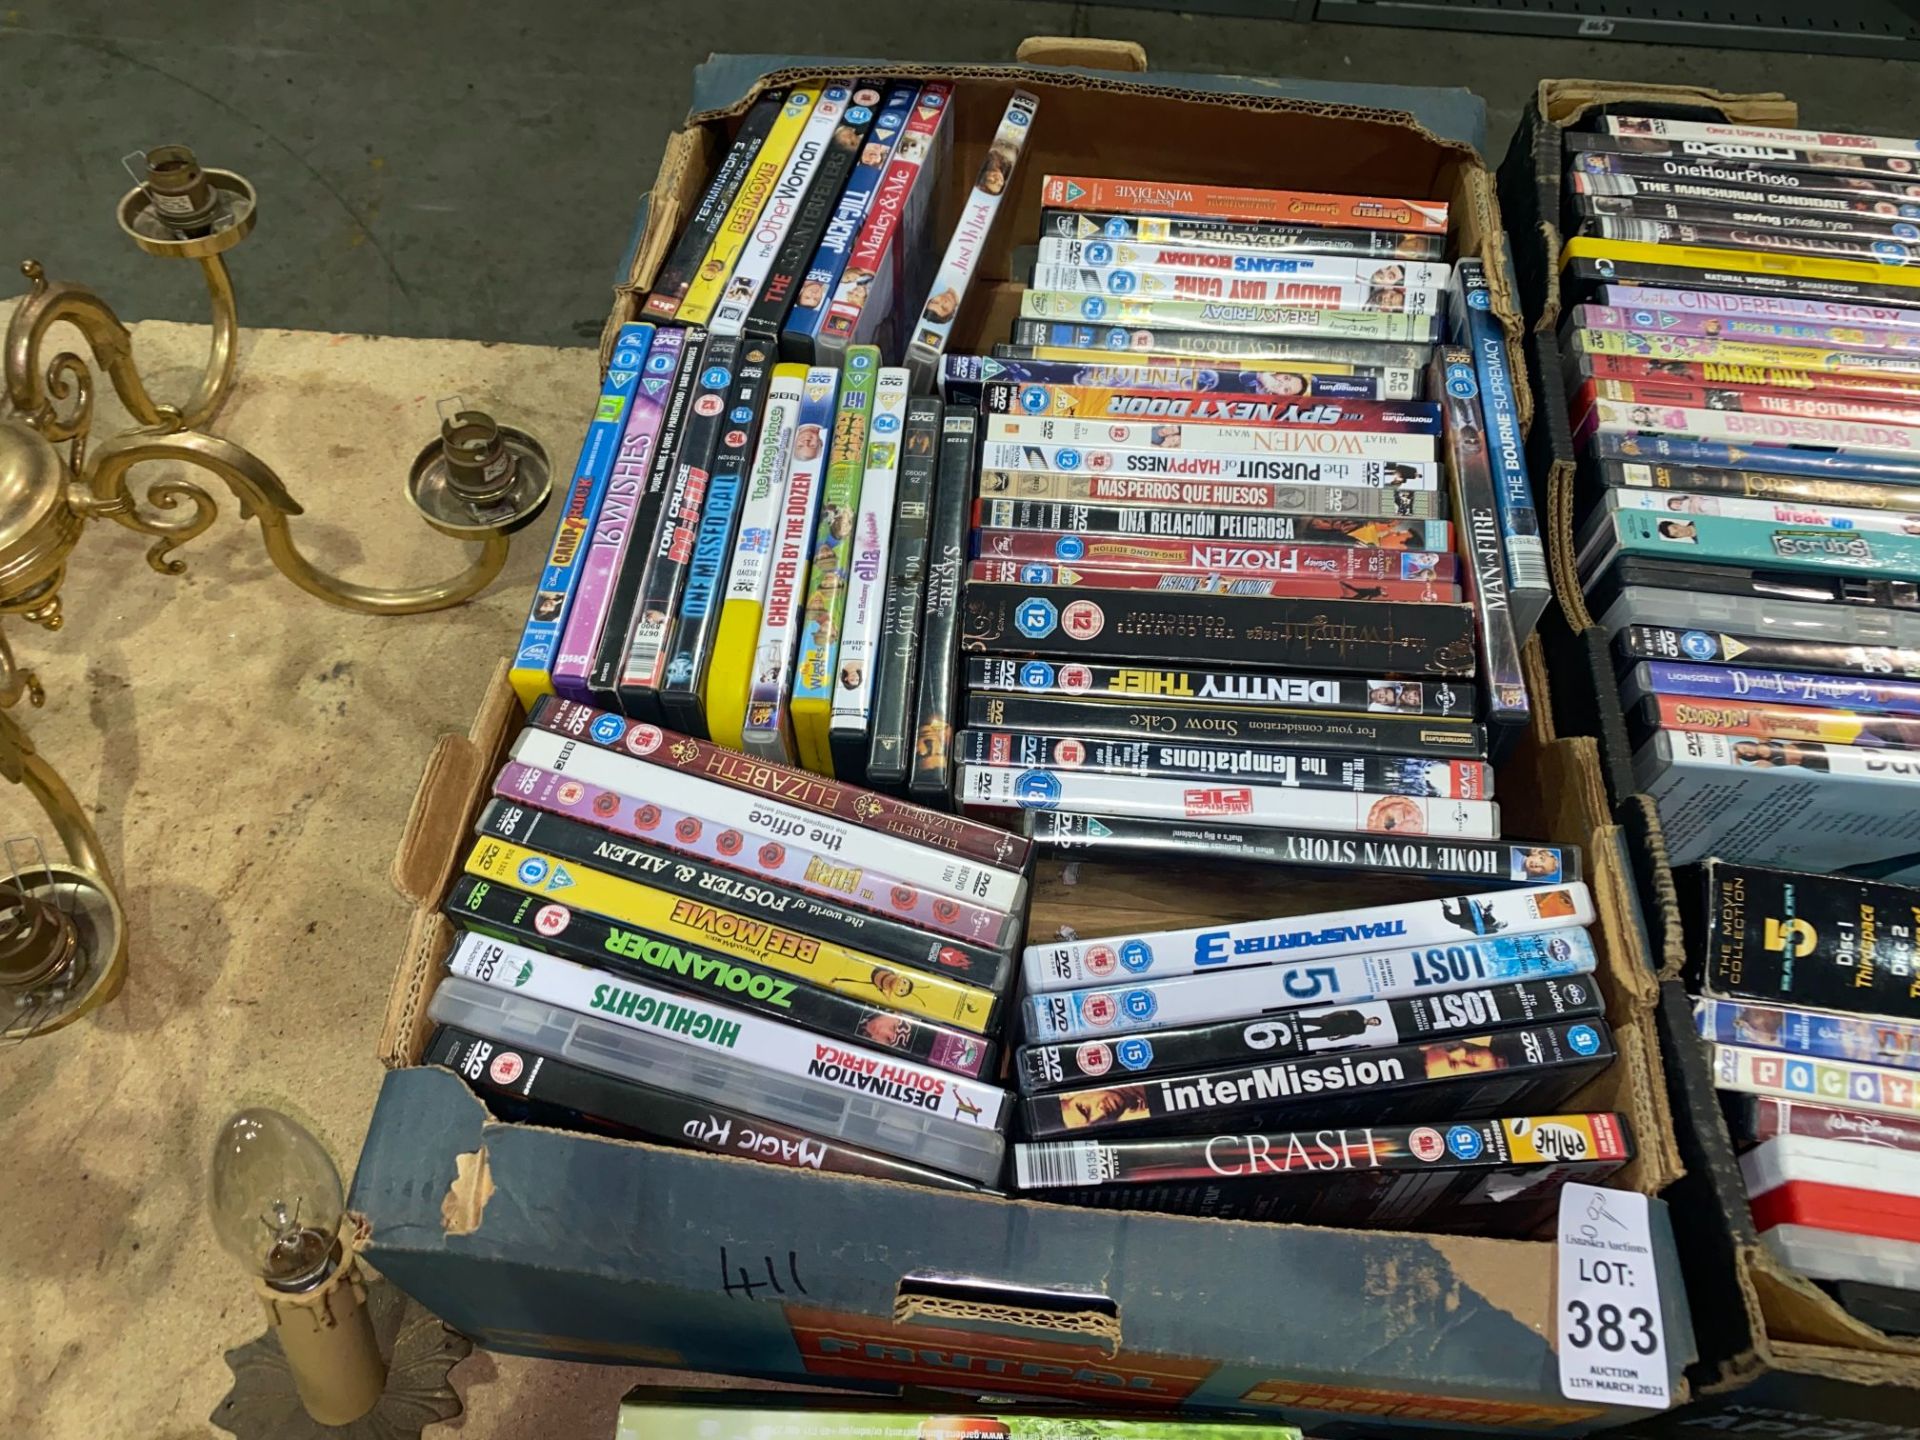 LARGE BOX OF DVDS